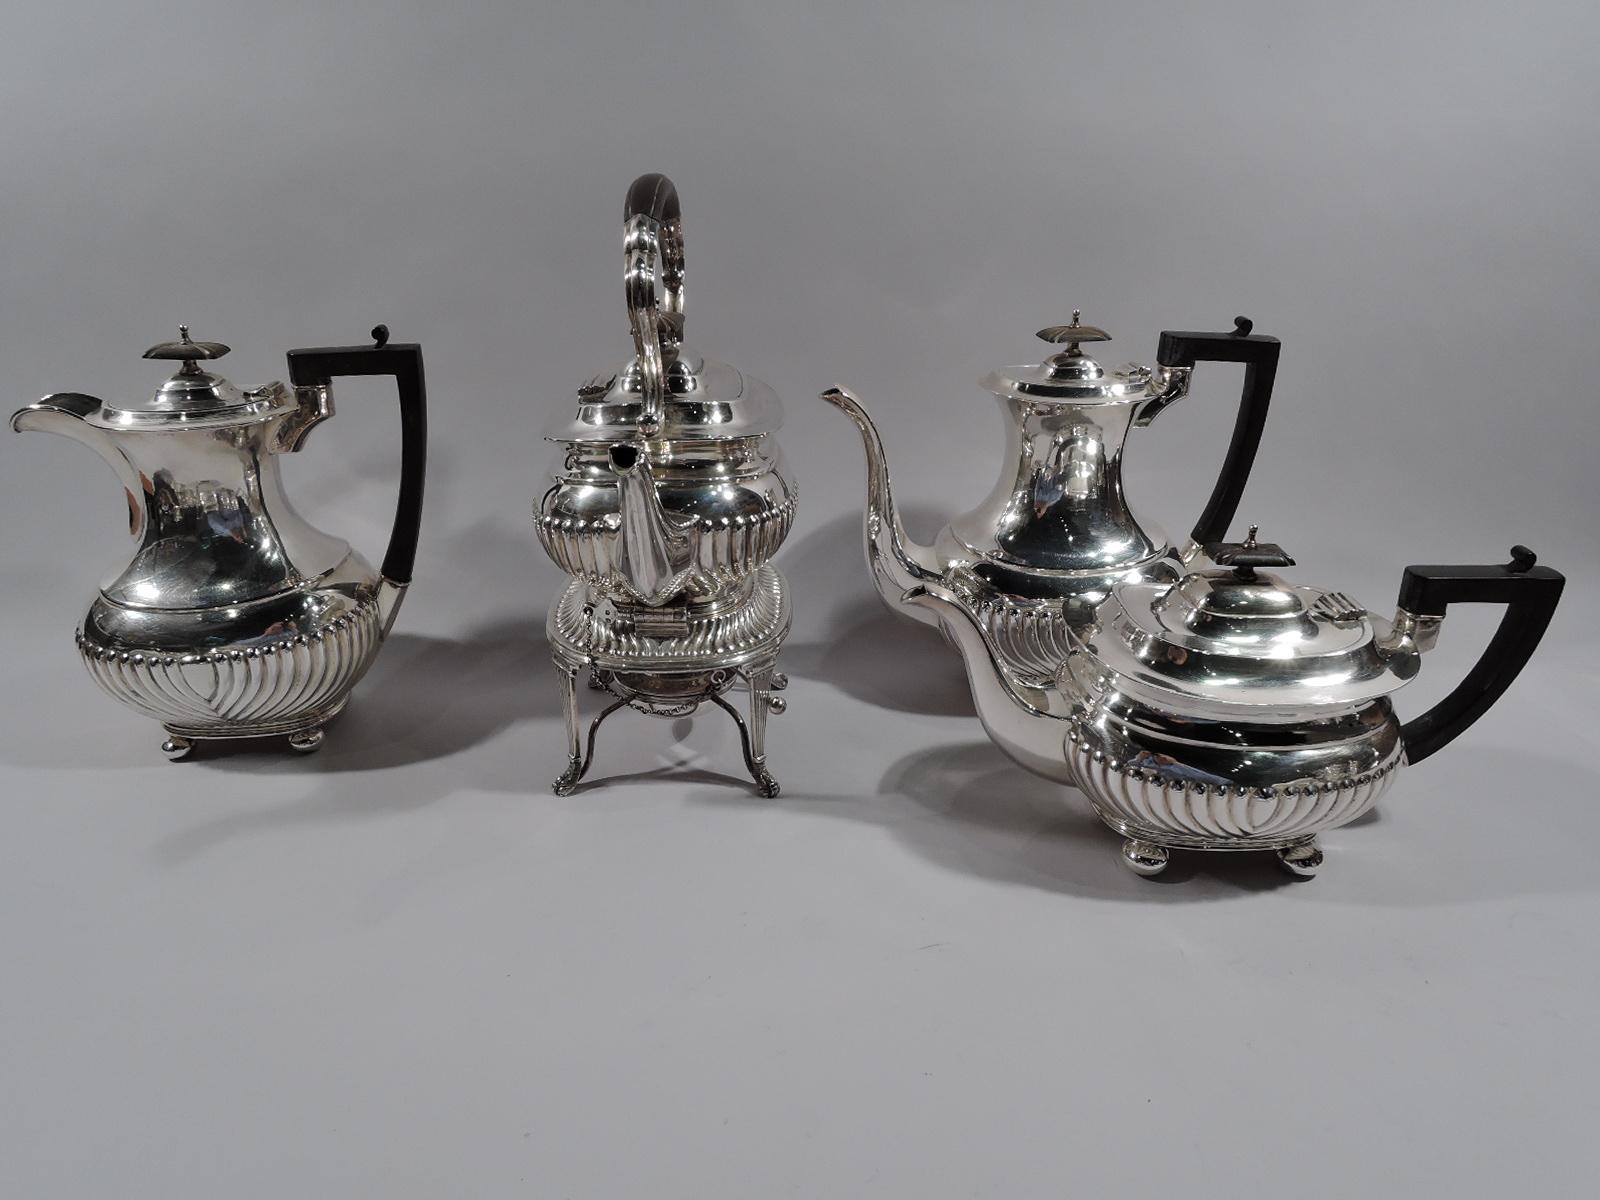 English Georgian sterling silver coffee and tea set, 1918-1919. This set comprises tea kettle on stand, coffeepot, teapot, hot water pot, creamer, sugar, and waste bowl.

Traditional with gadrooned bodies and squashed ball supports. Covers domed